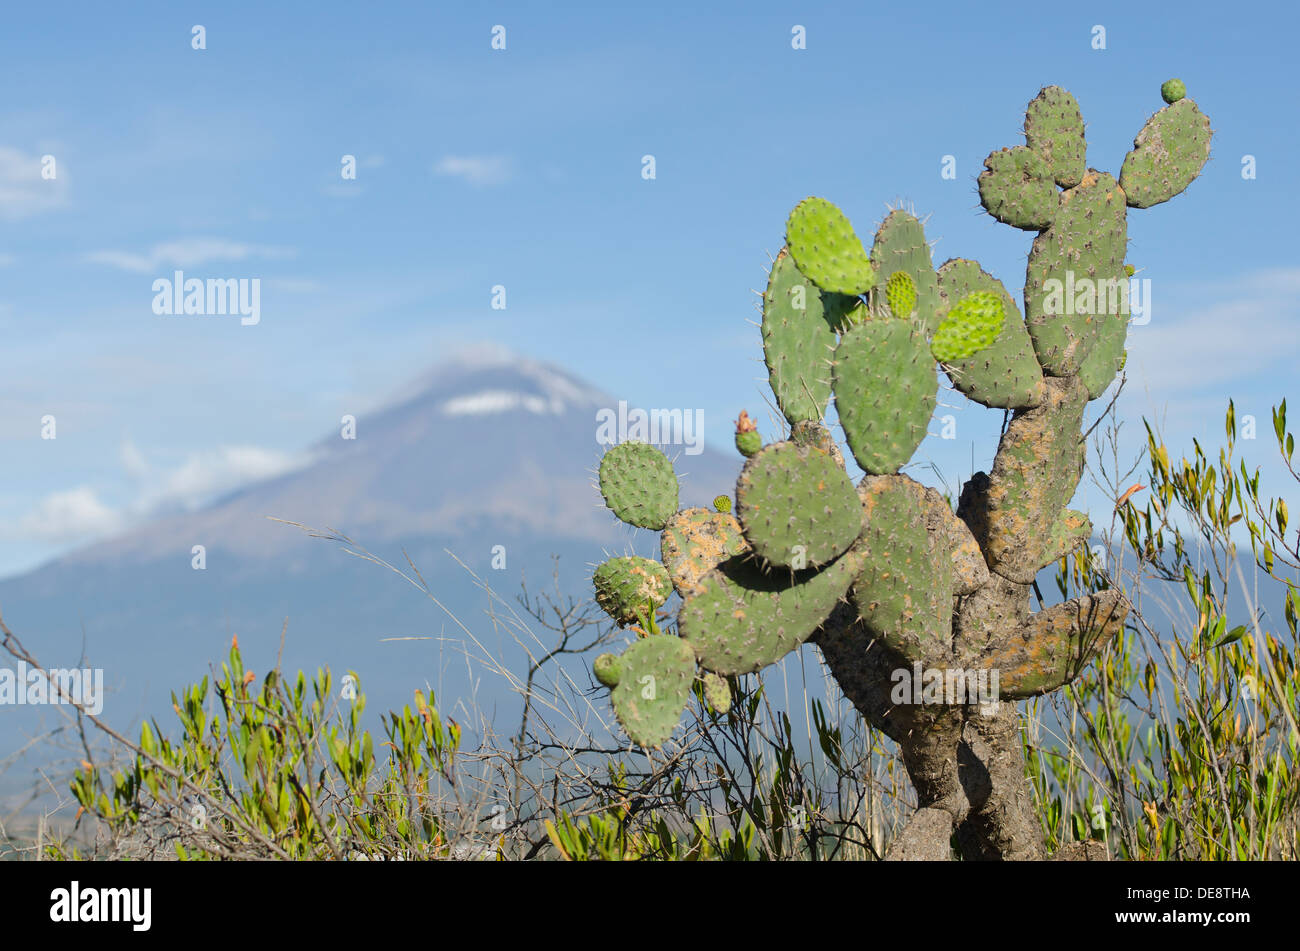 A nopal cactus plant in the countryside outside Puebla in Mexico with the volcano Popocatepetl in the background. Stock Photo